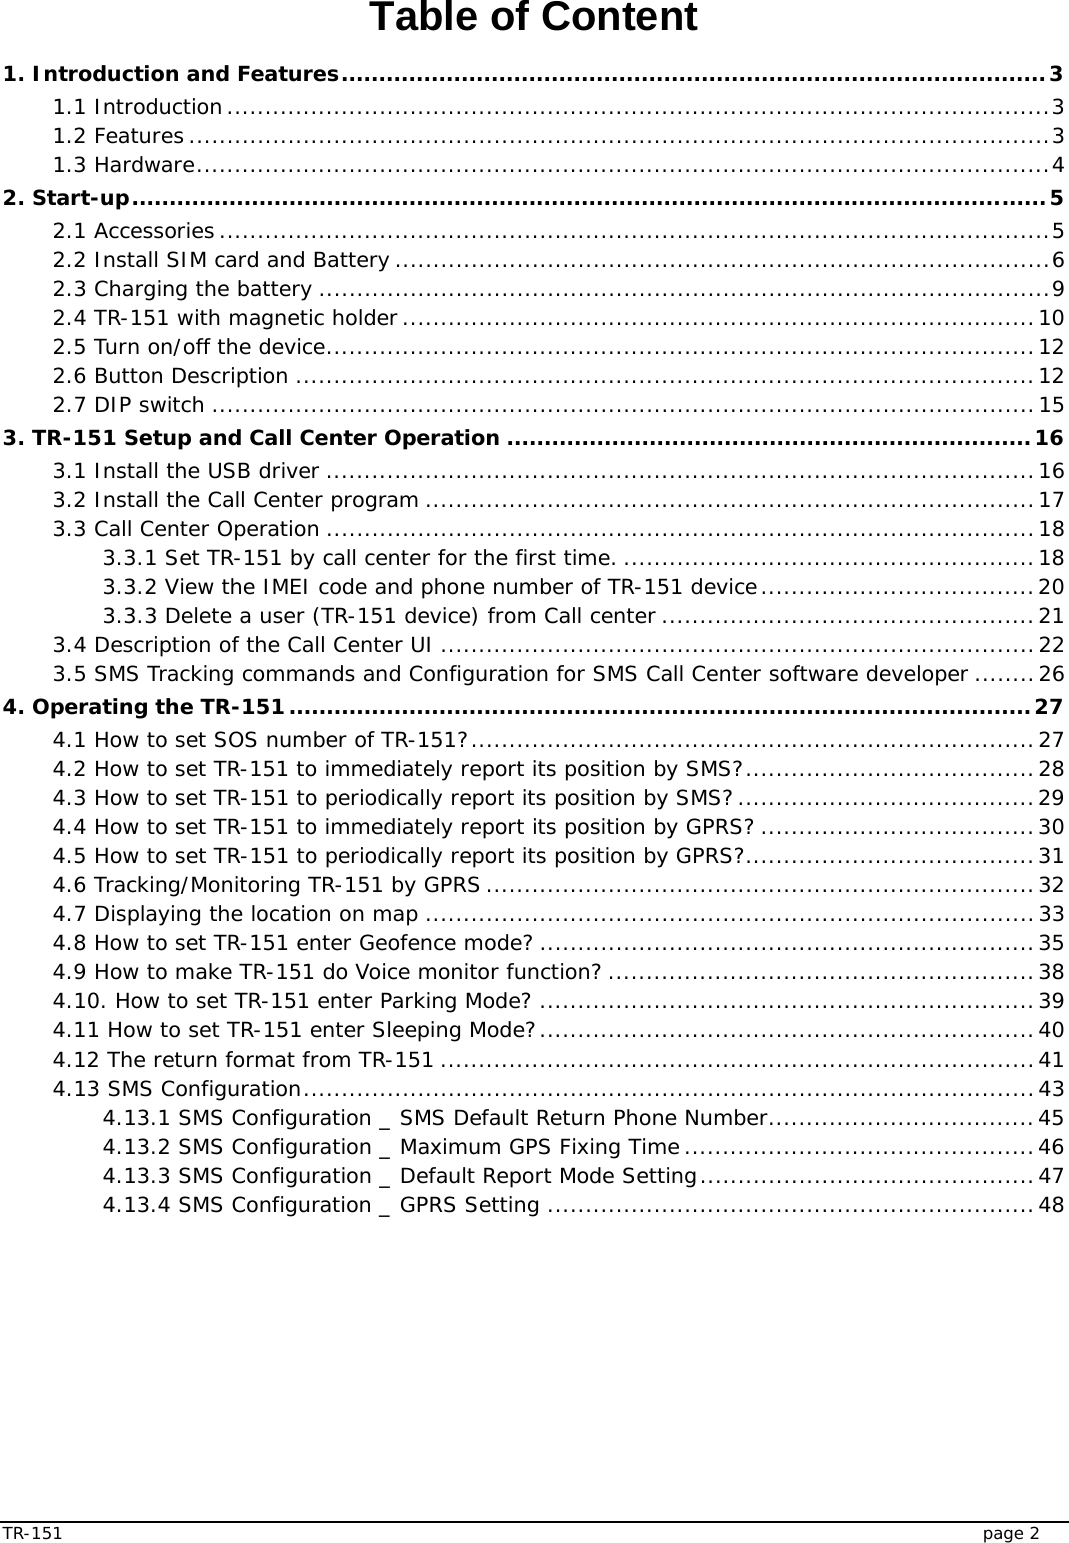  TR-151   page 2 Table of Content 1. Introduction and Features..............................................................................................3 1.1 Introduction............................................................................................................3 1.2 Features .................................................................................................................3 1.3 Hardware................................................................................................................4 2. Start-up..........................................................................................................................5 2.1 Accessories .............................................................................................................5 2.2 Install SIM card and Battery ......................................................................................6 2.3 Charging the battery ................................................................................................9 2.4 TR-151 with magnetic holder...................................................................................10 2.5 Turn on/off the device.............................................................................................12 2.6 Button Description .................................................................................................12 2.7 DIP switch ............................................................................................................15 3. TR-151 Setup and Call Center Operation ......................................................................16 3.1 Install the USB driver .............................................................................................16 3.2 Install the Call Center program ................................................................................17 3.3 Call Center Operation .............................................................................................18 3.3.1 Set TR-151 by call center for the first time. ......................................................18 3.3.2 View the IMEI code and phone number of TR-151 device....................................20 3.3.3 Delete a user (TR-151 device) from Call center .................................................21 3.4 Description of the Call Center UI ..............................................................................22 3.5 SMS Tracking commands and Configuration for SMS Call Center software developer ........26 4. Operating the TR-151...................................................................................................27 4.1 How to set SOS number of TR-151?..........................................................................27 4.2 How to set TR-151 to immediately report its position by SMS?......................................28 4.3 How to set TR-151 to periodically report its position by SMS?.......................................29 4.4 How to set TR-151 to immediately report its position by GPRS? ....................................30 4.5 How to set TR-151 to periodically report its position by GPRS?......................................31 4.6 Tracking/Monitoring TR-151 by GPRS ........................................................................32 4.7 Displaying the location on map ................................................................................33 4.8 How to set TR-151 enter Geofence mode? .................................................................35 4.9 How to make TR-151 do Voice monitor function? ........................................................38 4.10. How to set TR-151 enter Parking Mode? .................................................................39 4.11 How to set TR-151 enter Sleeping Mode?.................................................................40 4.12 The return format from TR-151 ..............................................................................41 4.13 SMS Configuration................................................................................................43 4.13.1 SMS Configuration _ SMS Default Return Phone Number...................................45 4.13.2 SMS Configuration _ Maximum GPS Fixing Time..............................................46 4.13.3 SMS Configuration _ Default Report Mode Setting............................................47 4.13.4 SMS Configuration _ GPRS Setting ................................................................48  